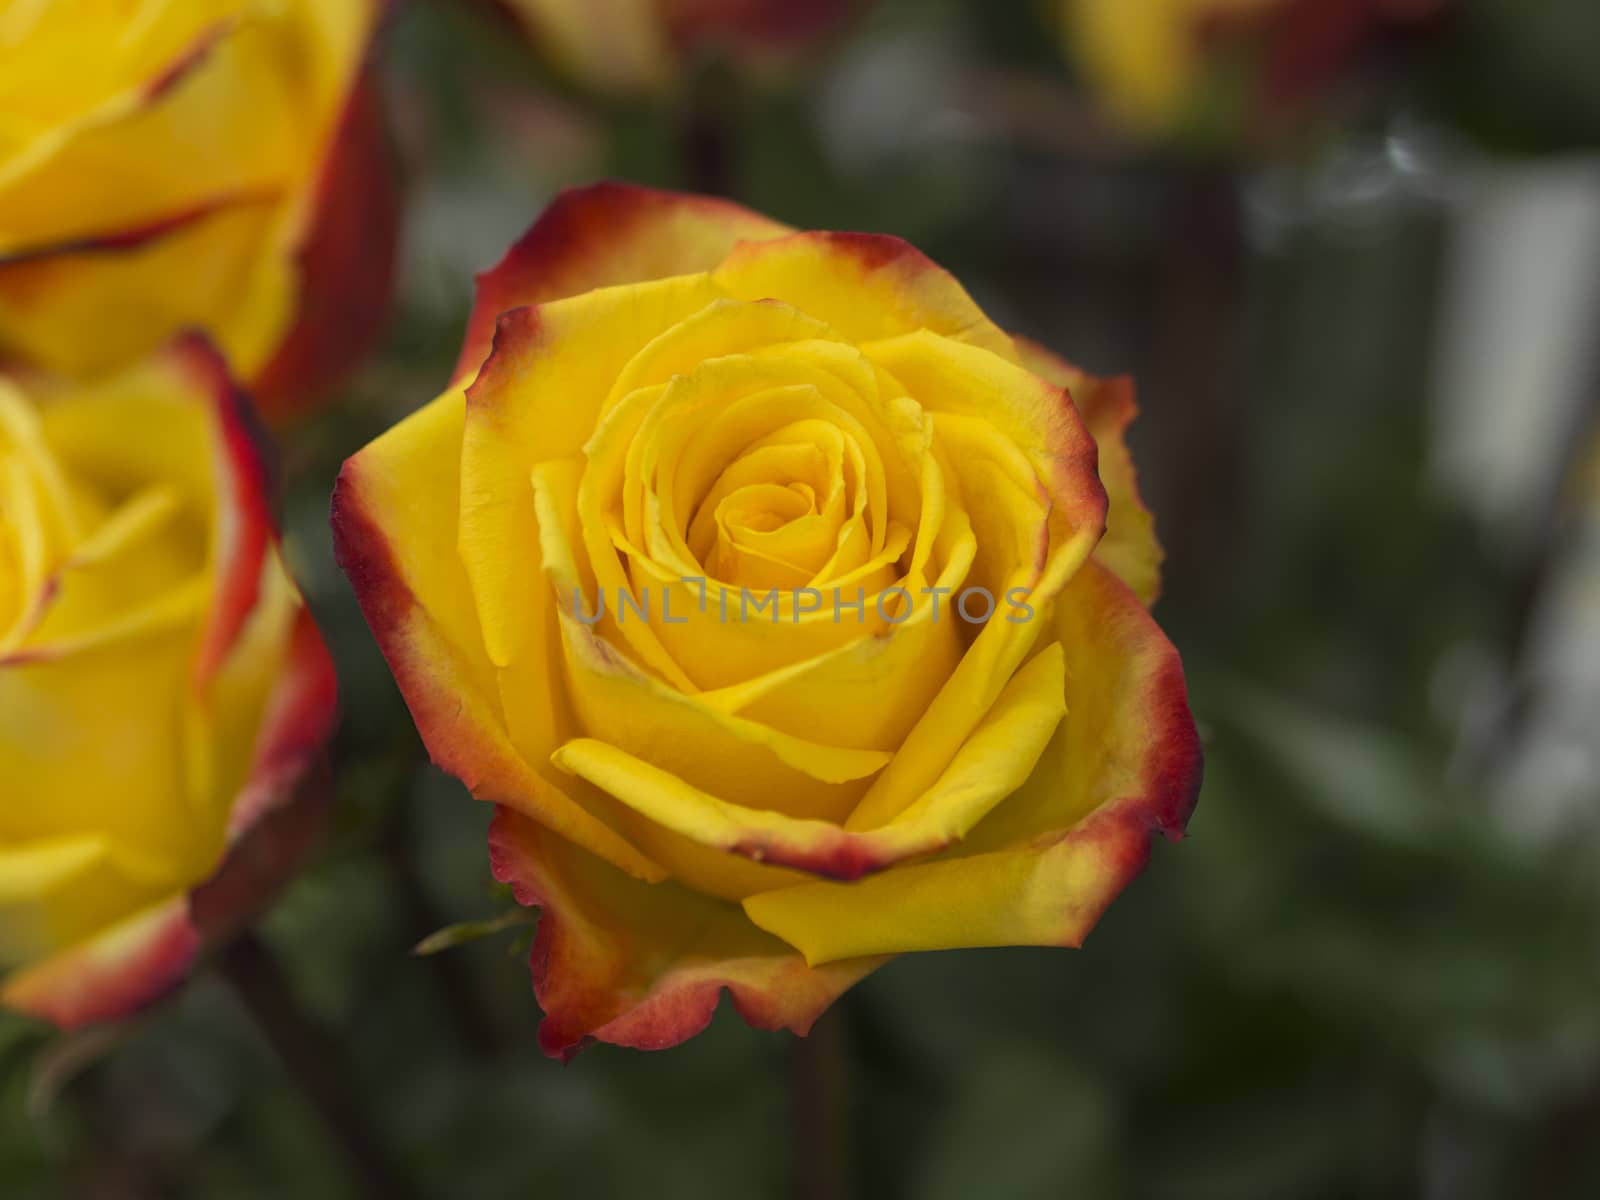 ckose up blooming yellow rose with red border on the flower leaves